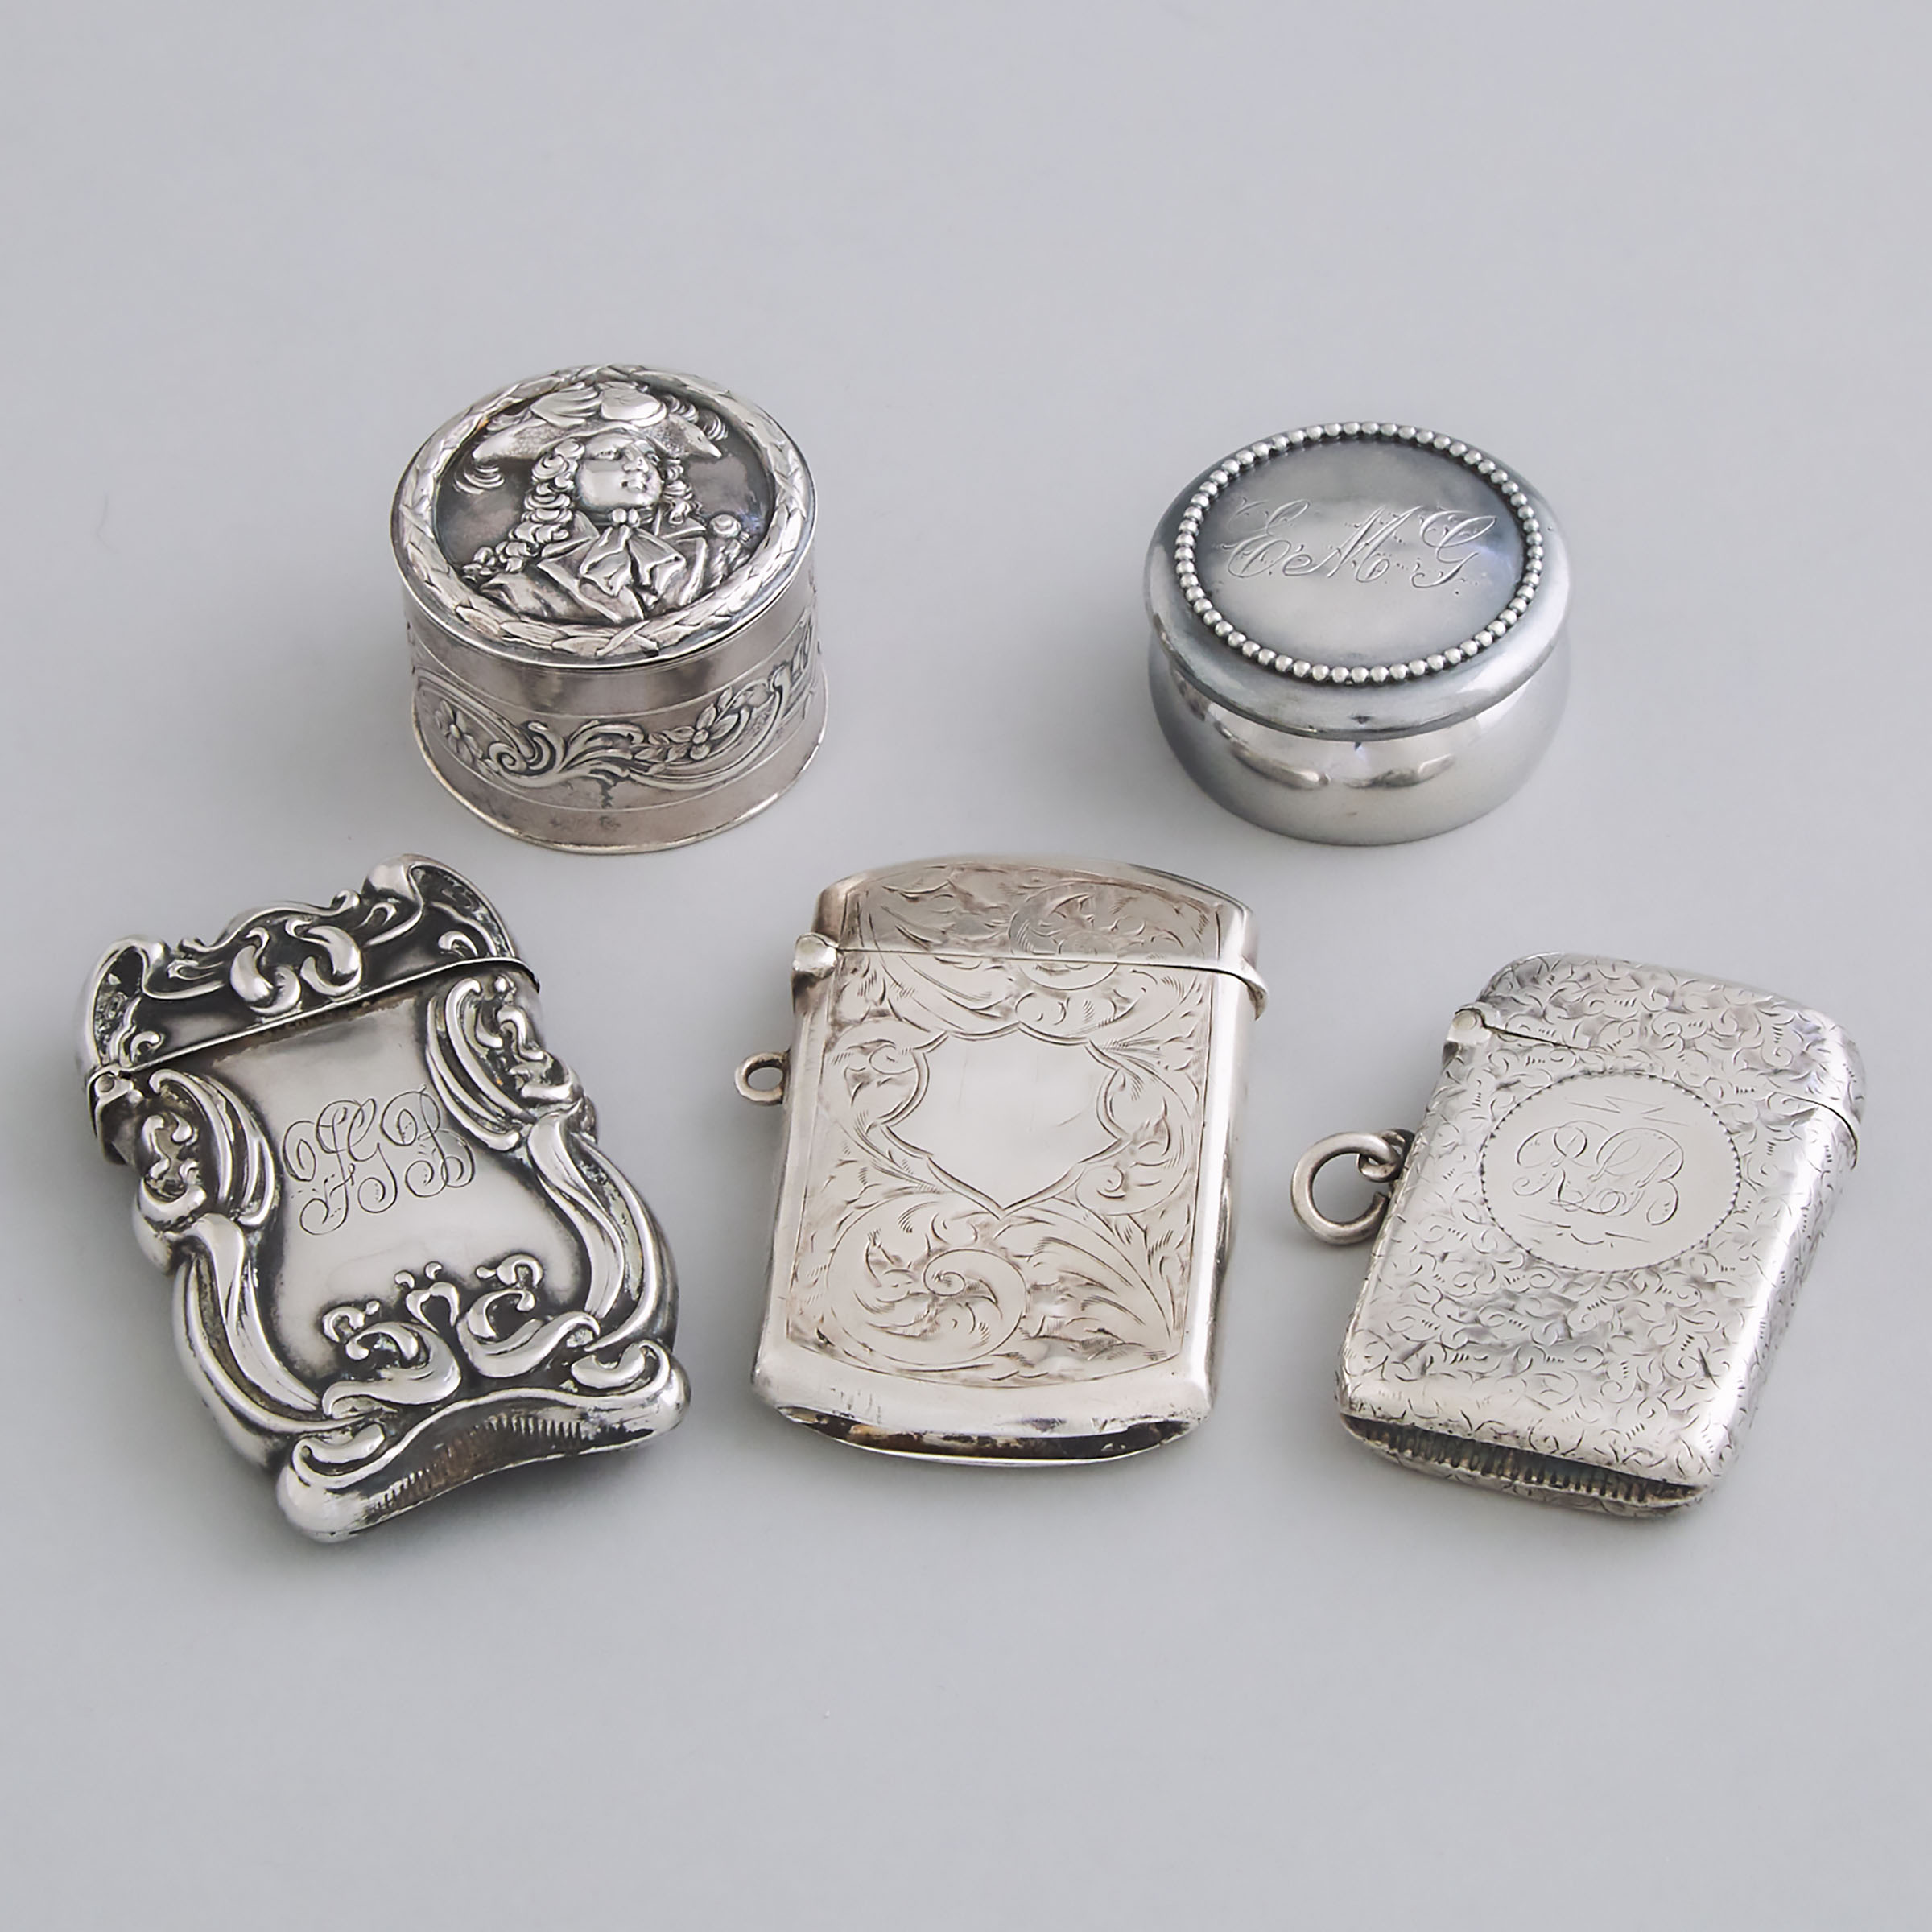 Five North American, English and German Silver Vesta Cases and Circular Boxes, late 19th/early 20th century